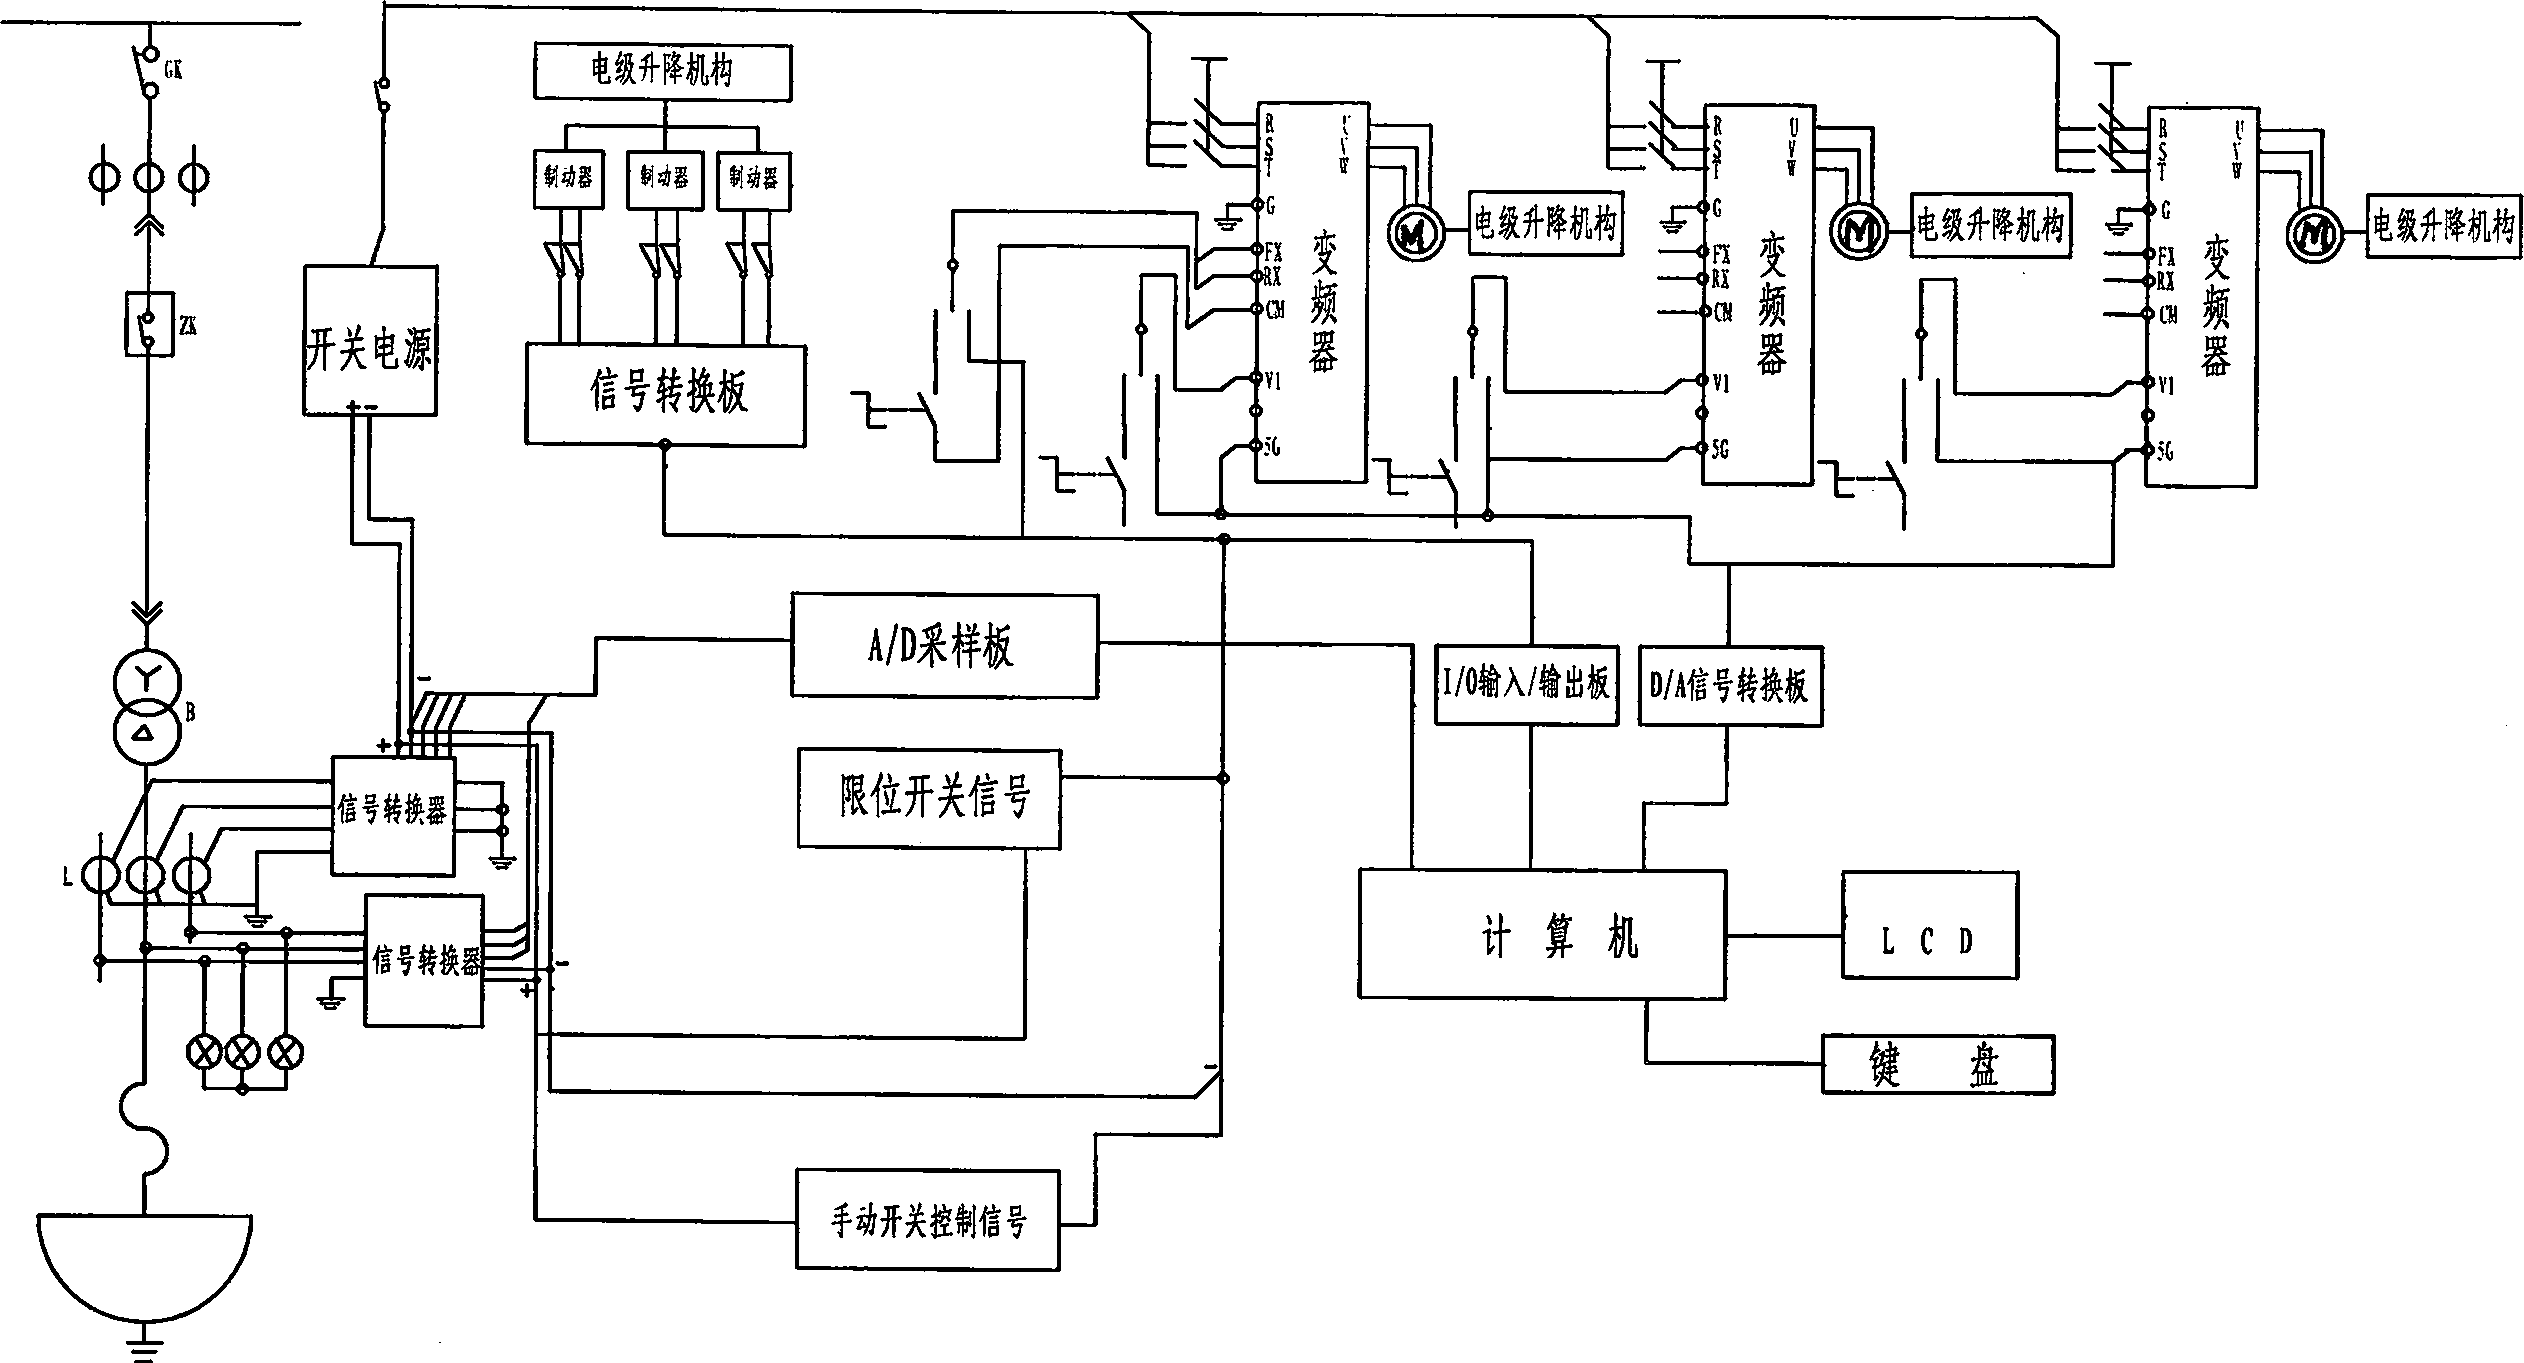 Method for aotomatic controlling rise fall of electrodes in mine hot stove